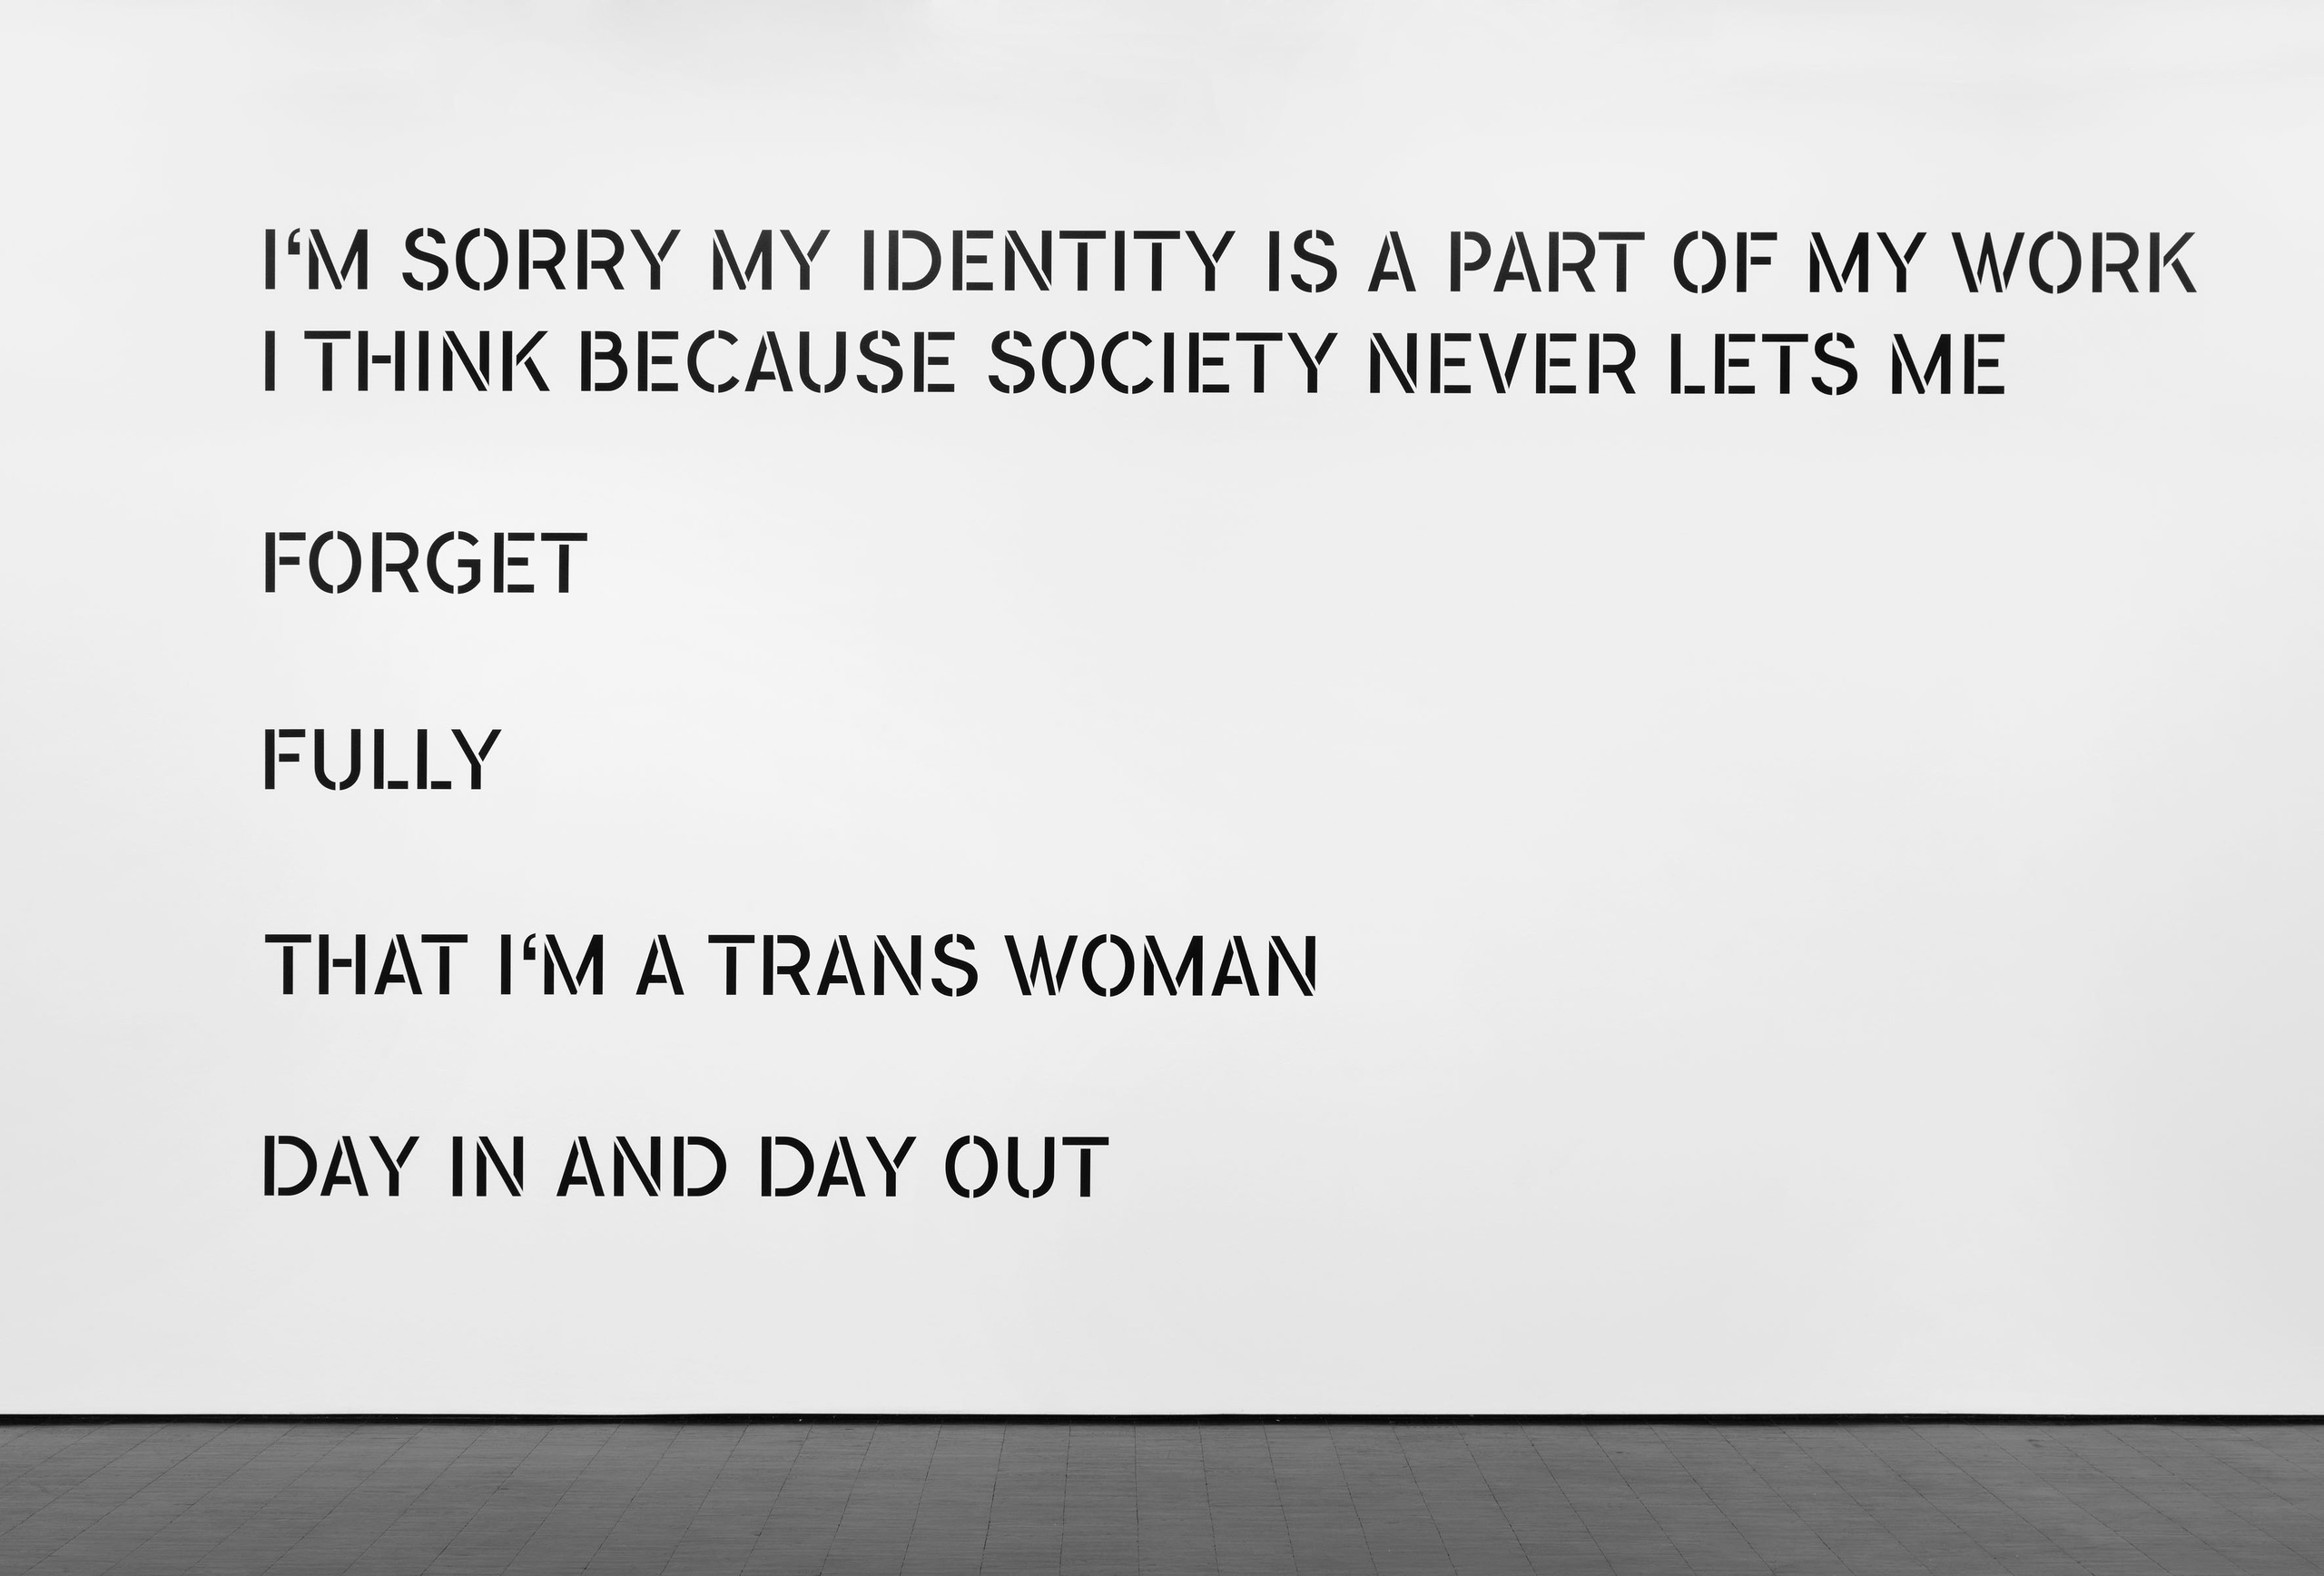  I’M SORRY MY IDENTITY IS A PART OF MY WORK/ I THINK BECAUSE SOCIETY NEVER LETS ME/ FORGET/ FULLY/ THAT I’M A TRANS WOMAN/ DAY IN AND DAY OUT, 2022vinyl text on walldimensions variable (this example: 280 x 485 cm)